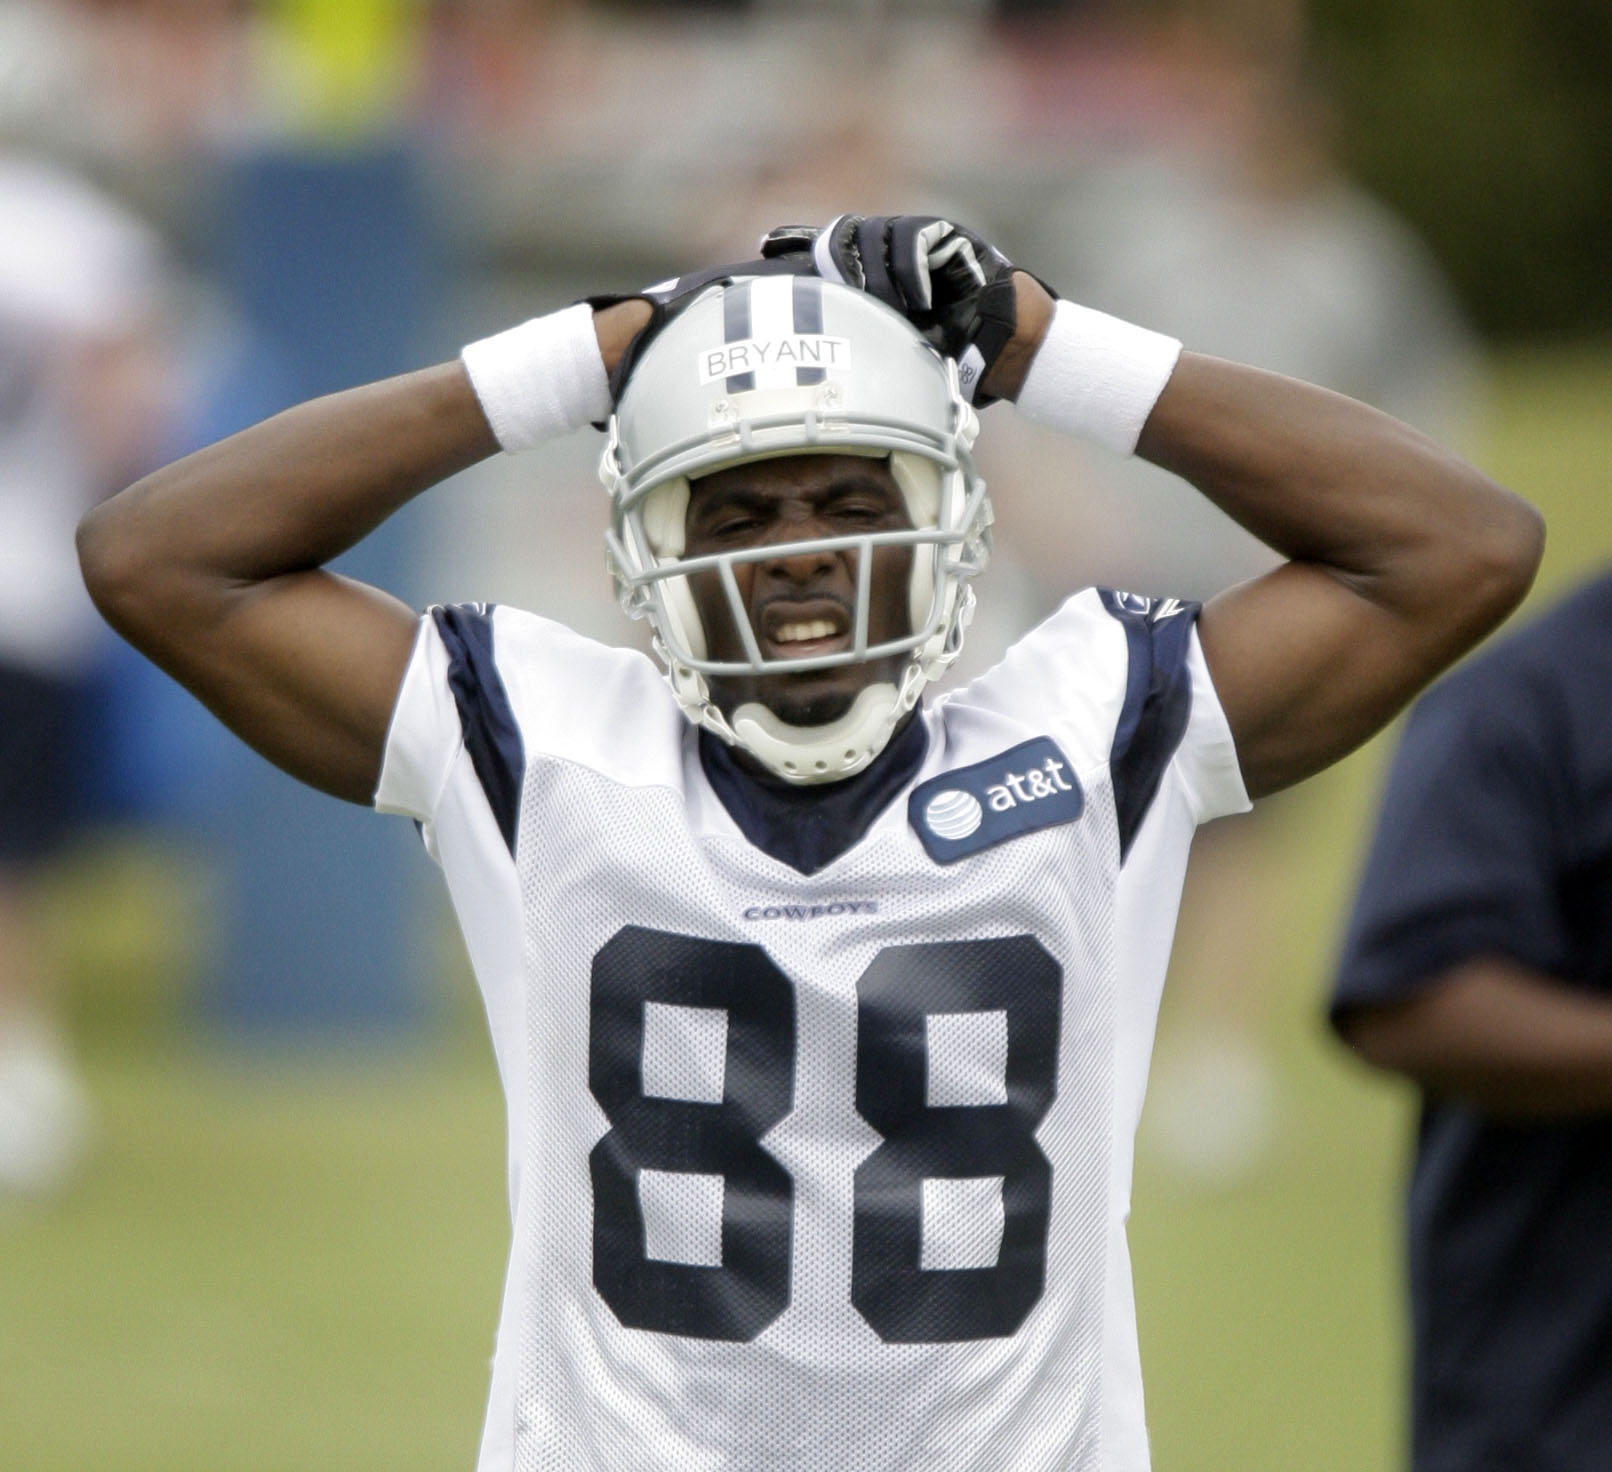 Dallas Cowboys first round draft pick Dez Bryant gets winded during Dallas Cowboys Rookie Camp at Valley Ranch in Irving, Texas on April 30, 2010.(Michael Ainsworth/The Dallas Morning News)